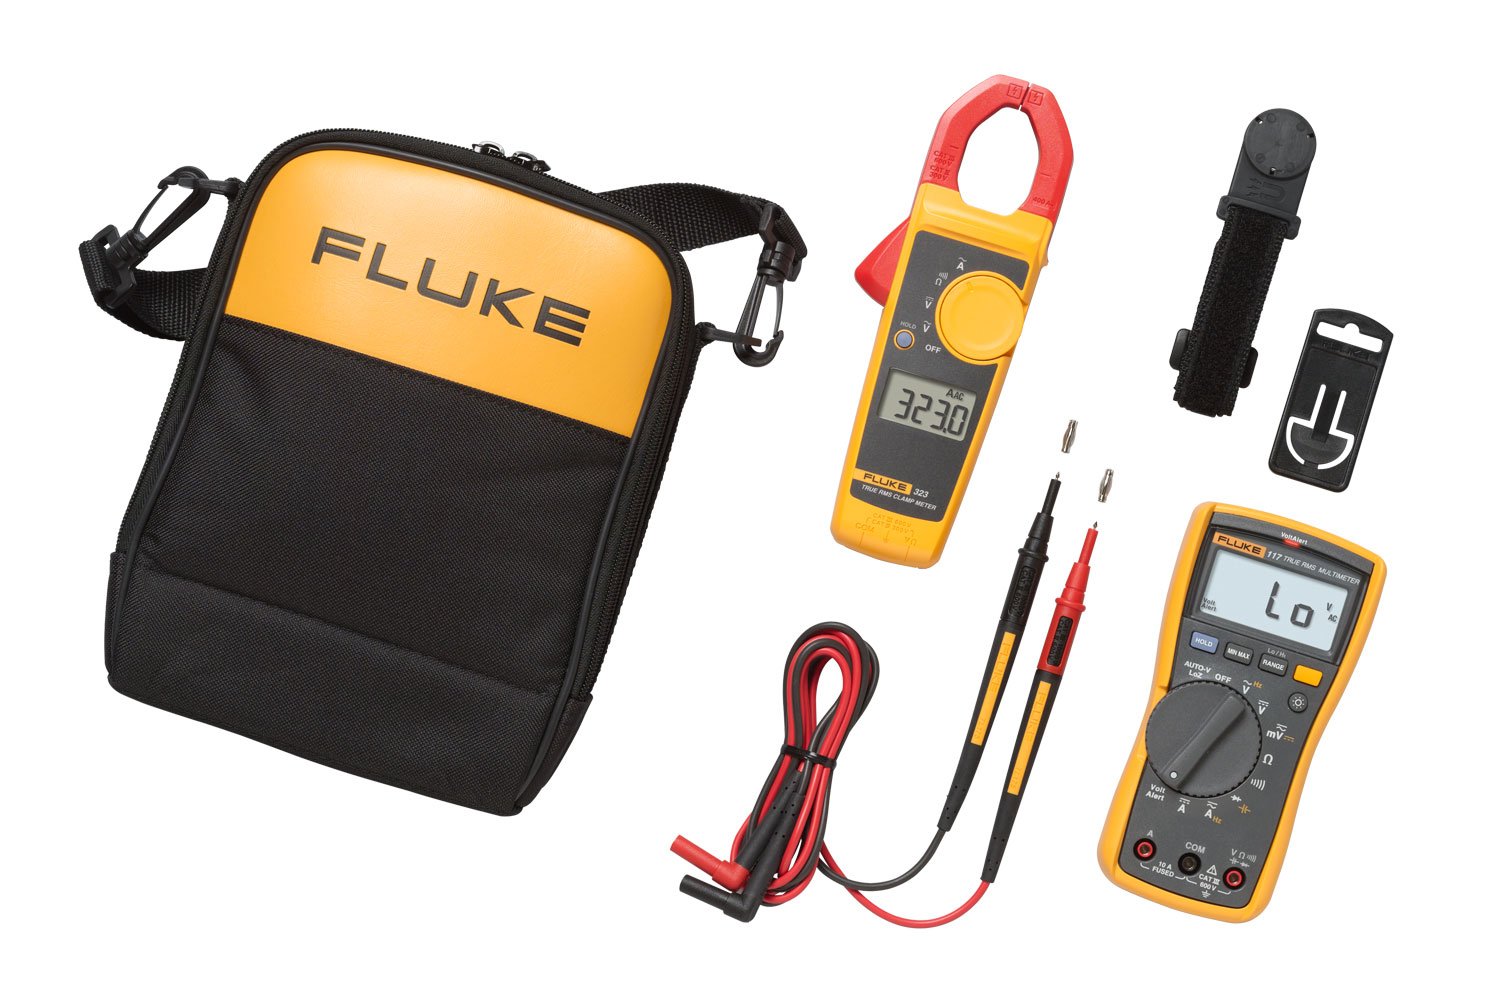 Fluke 323 600V Clamp Meter KIT6N with TL175 Leads C150 Case and 1AC Voltstick